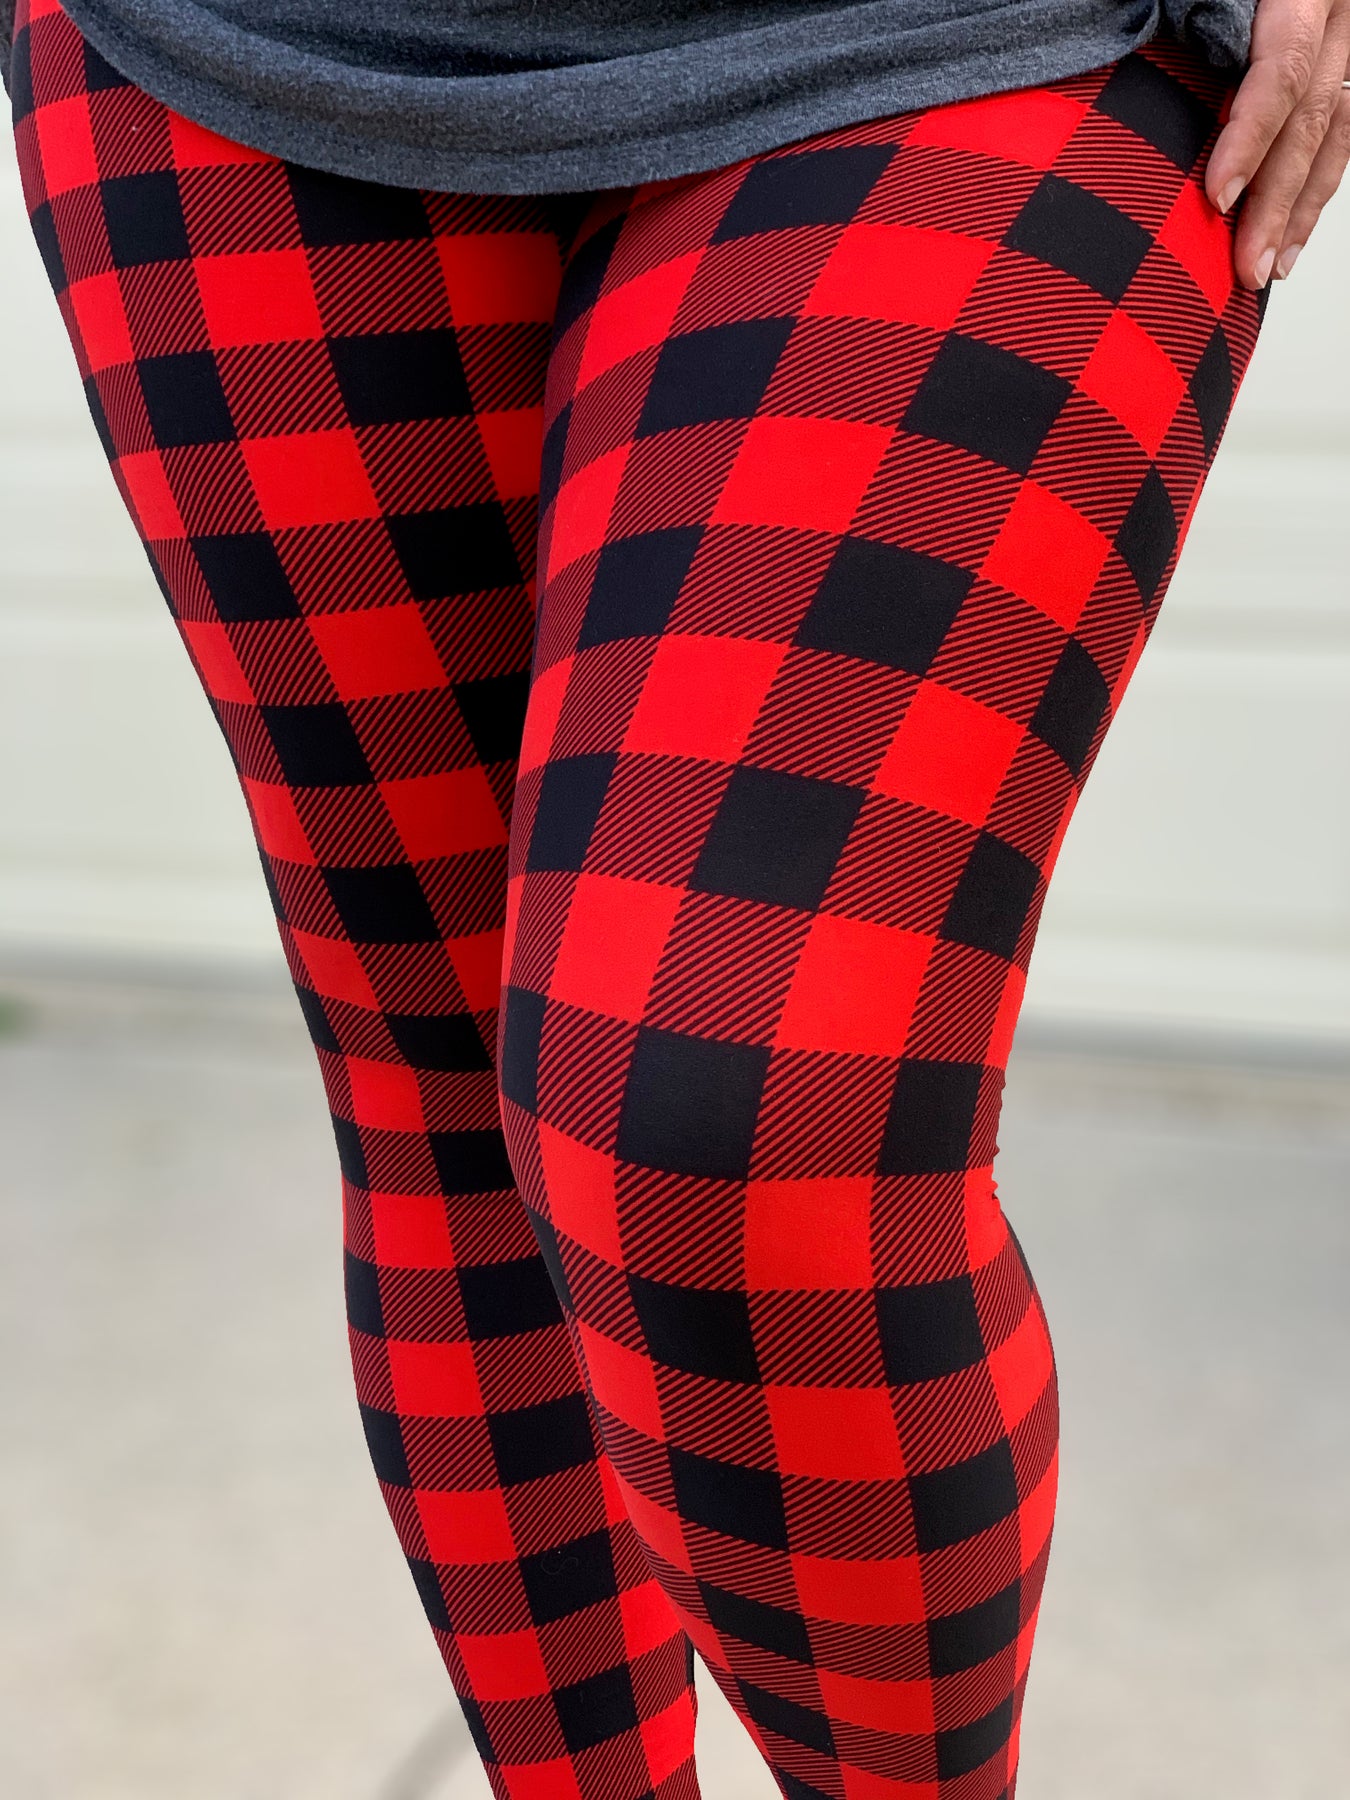 High waisted super stretchy red and black buffalo plaid womens leggings  plus size 2x, 3x, 4x, 5x – The Purple Puddle